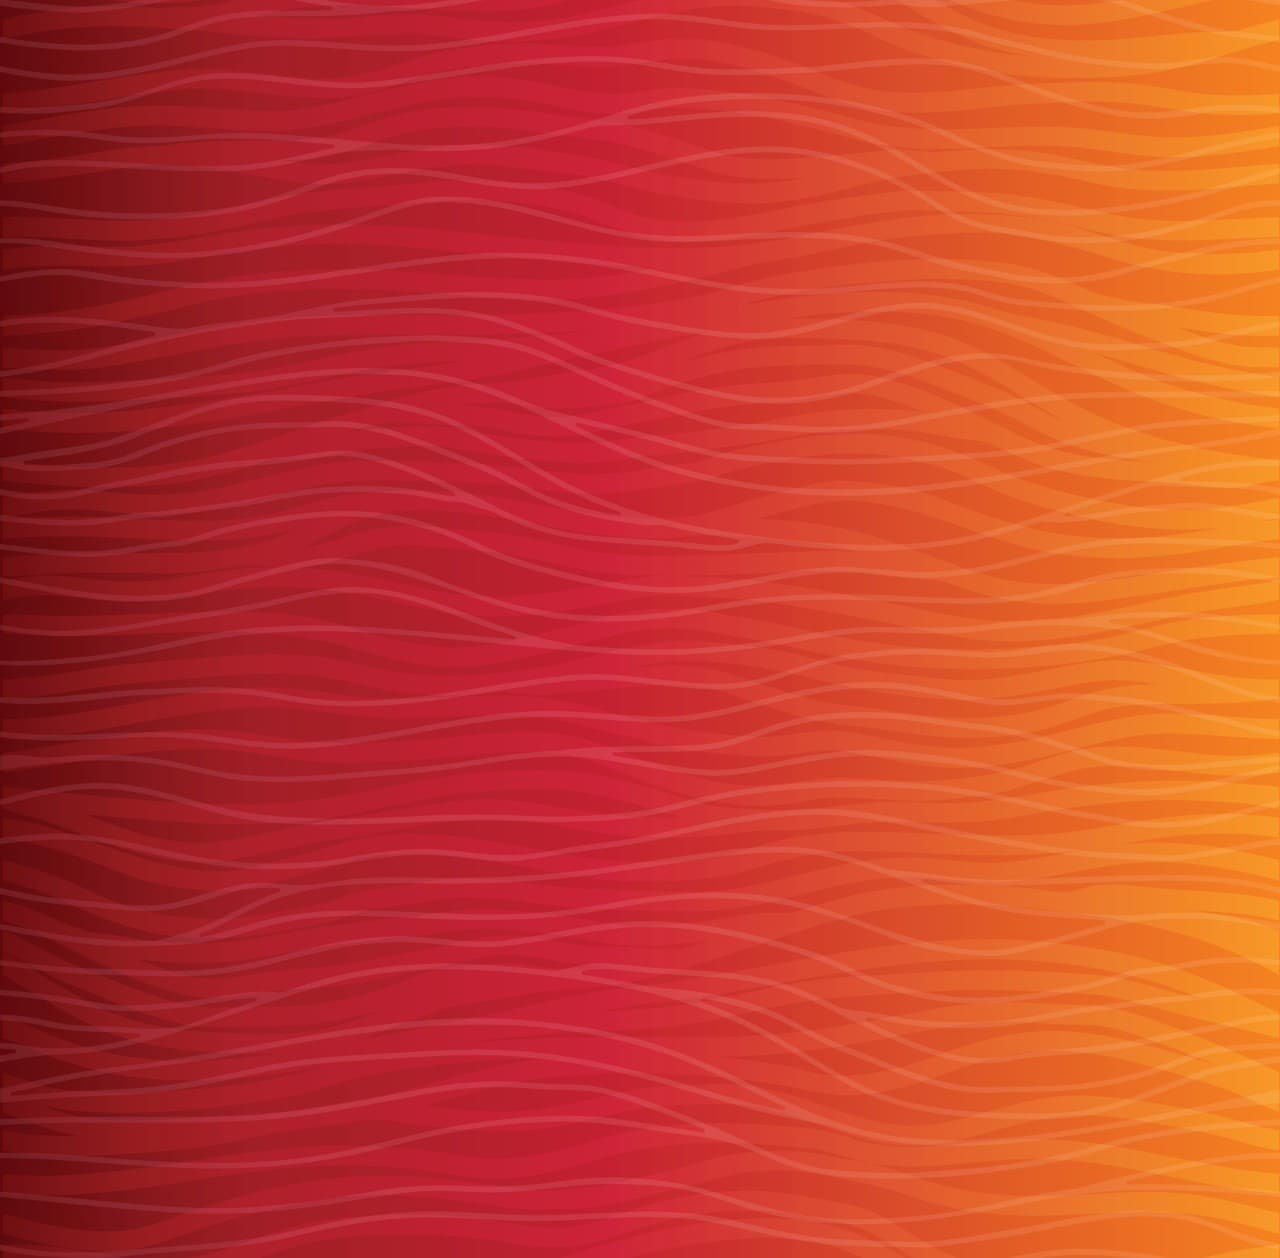 Red Orange abstract art